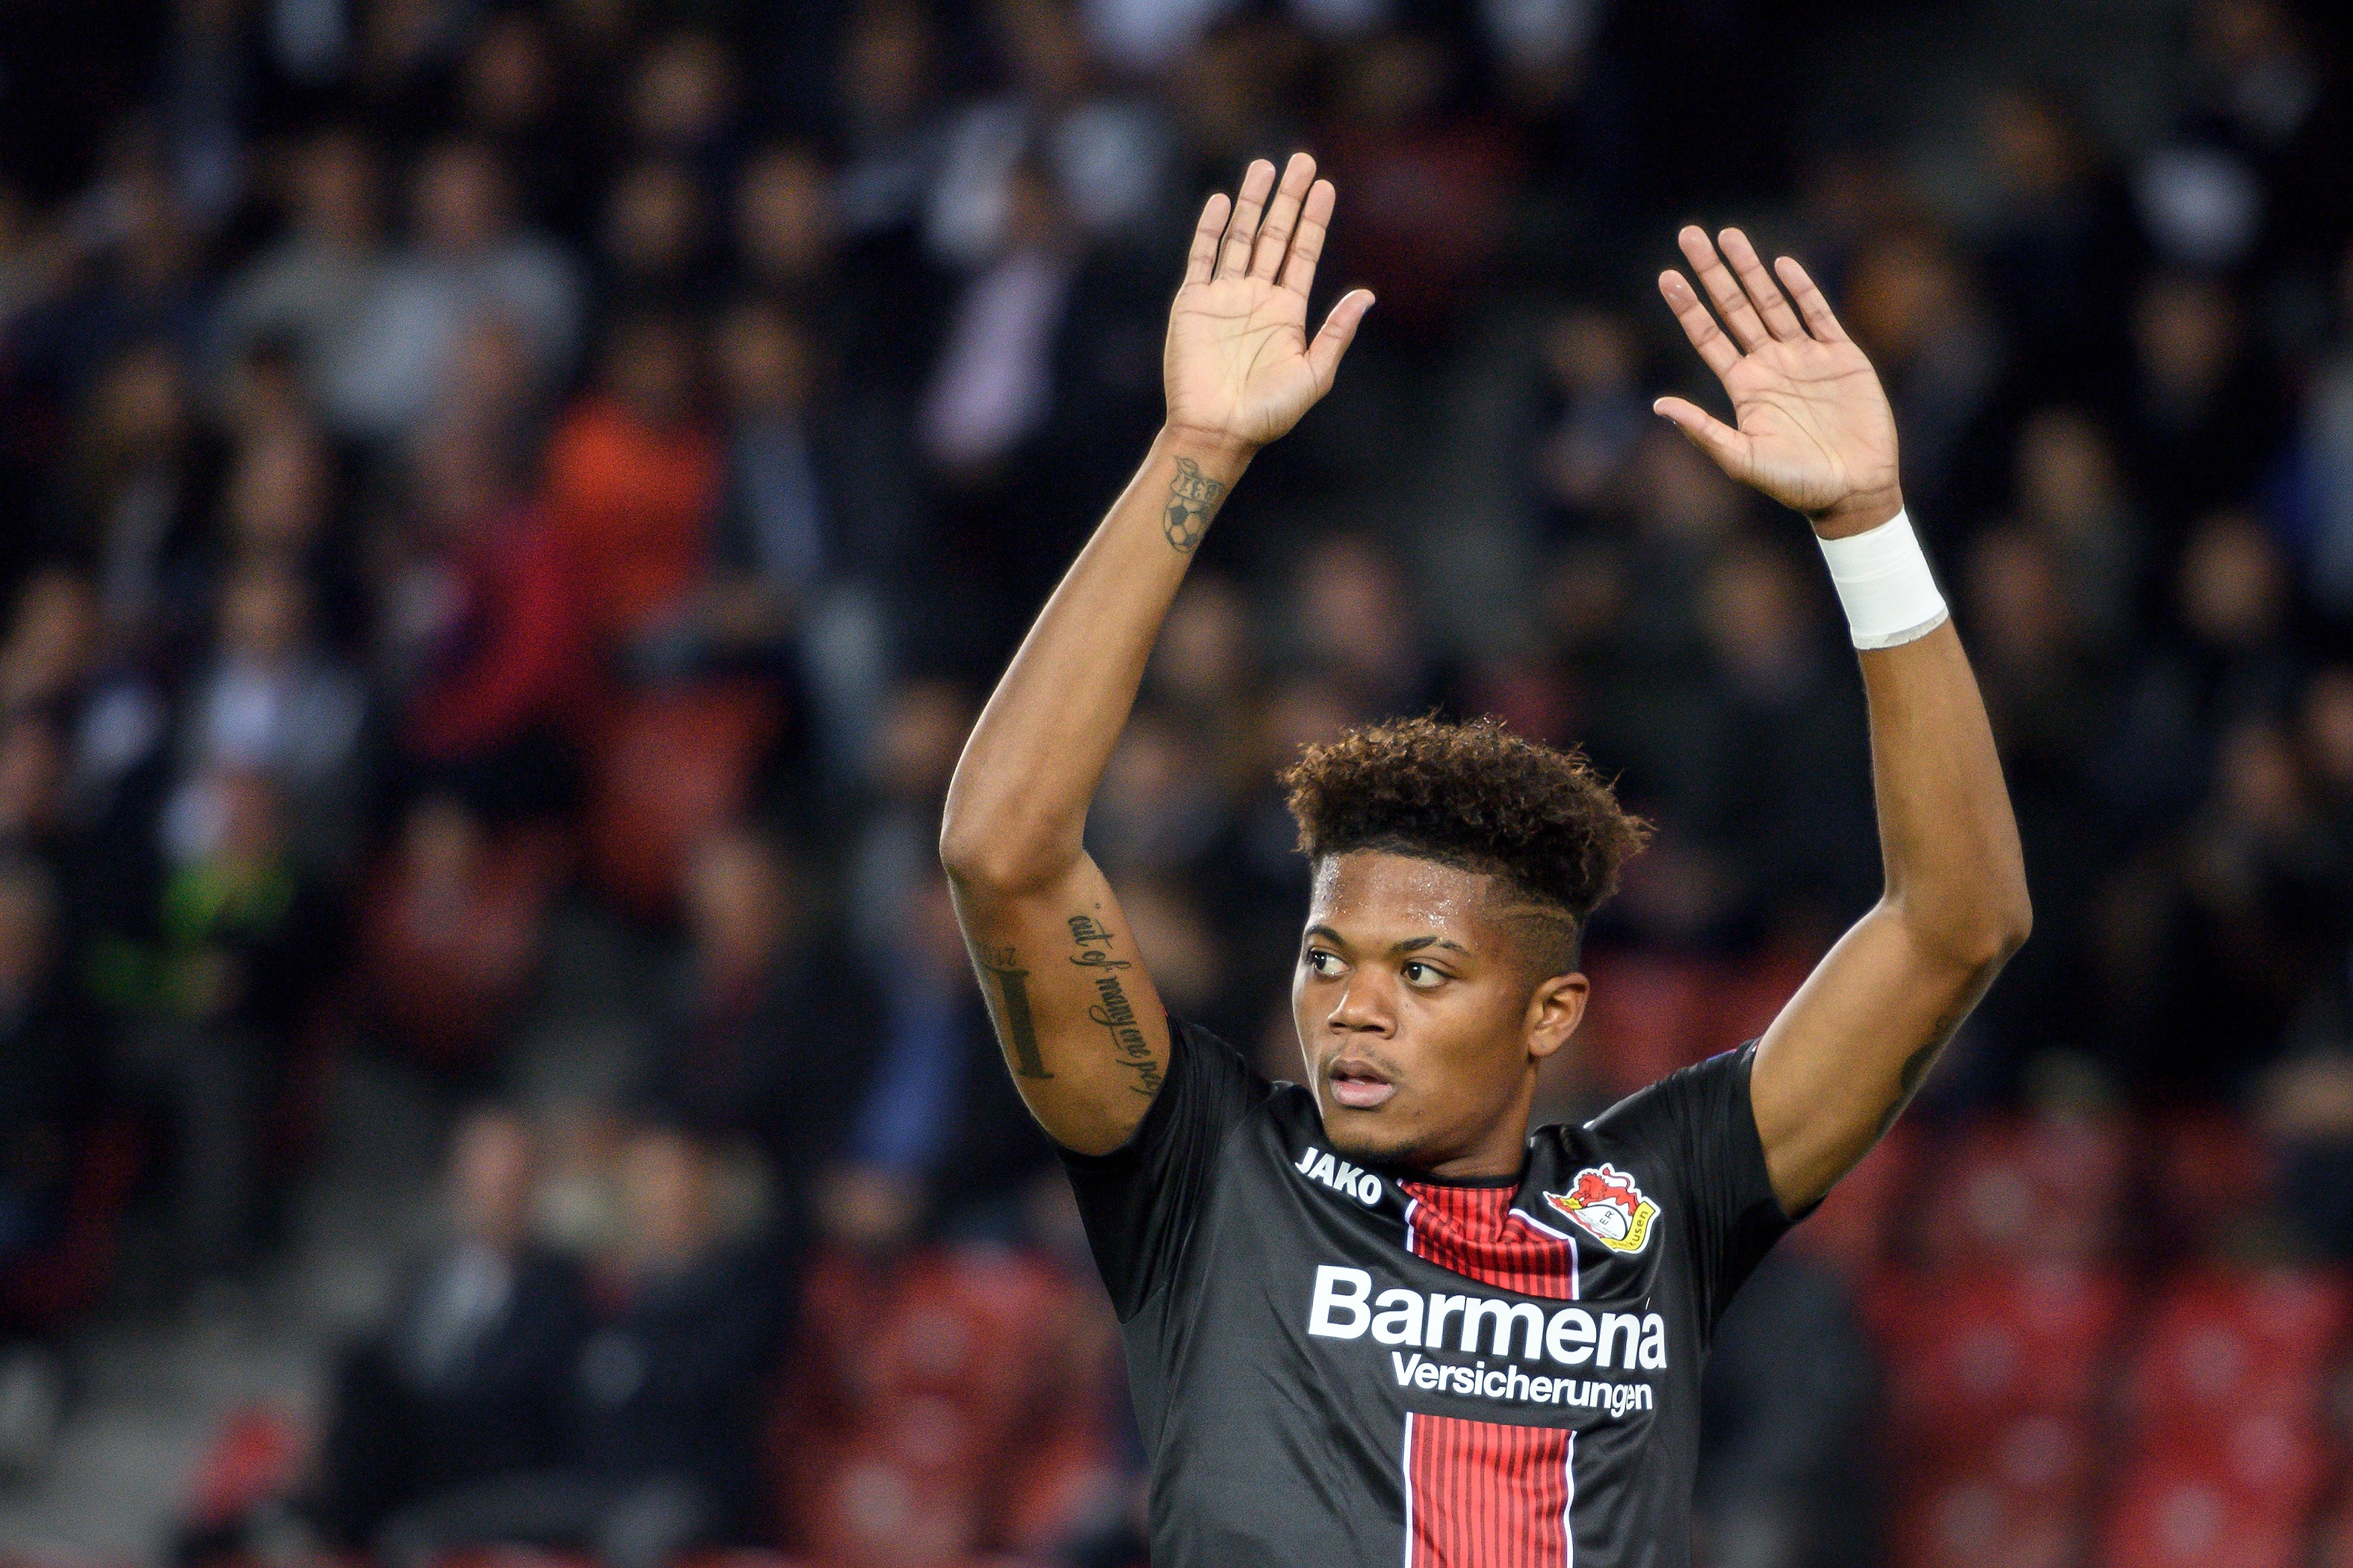 Bayer Leverkusen's Jamaican forward Leon Bailey reacts during the UEFA Europa League group A football match between FC Zurich and Bayer Leverkusen at Letzigrund stadium in Zurich on October 25, 2018. (Photo by Fabrice COFFRINI / AFP)        (Photo credit should read FABRICE COFFRINI/AFP/Getty Images)